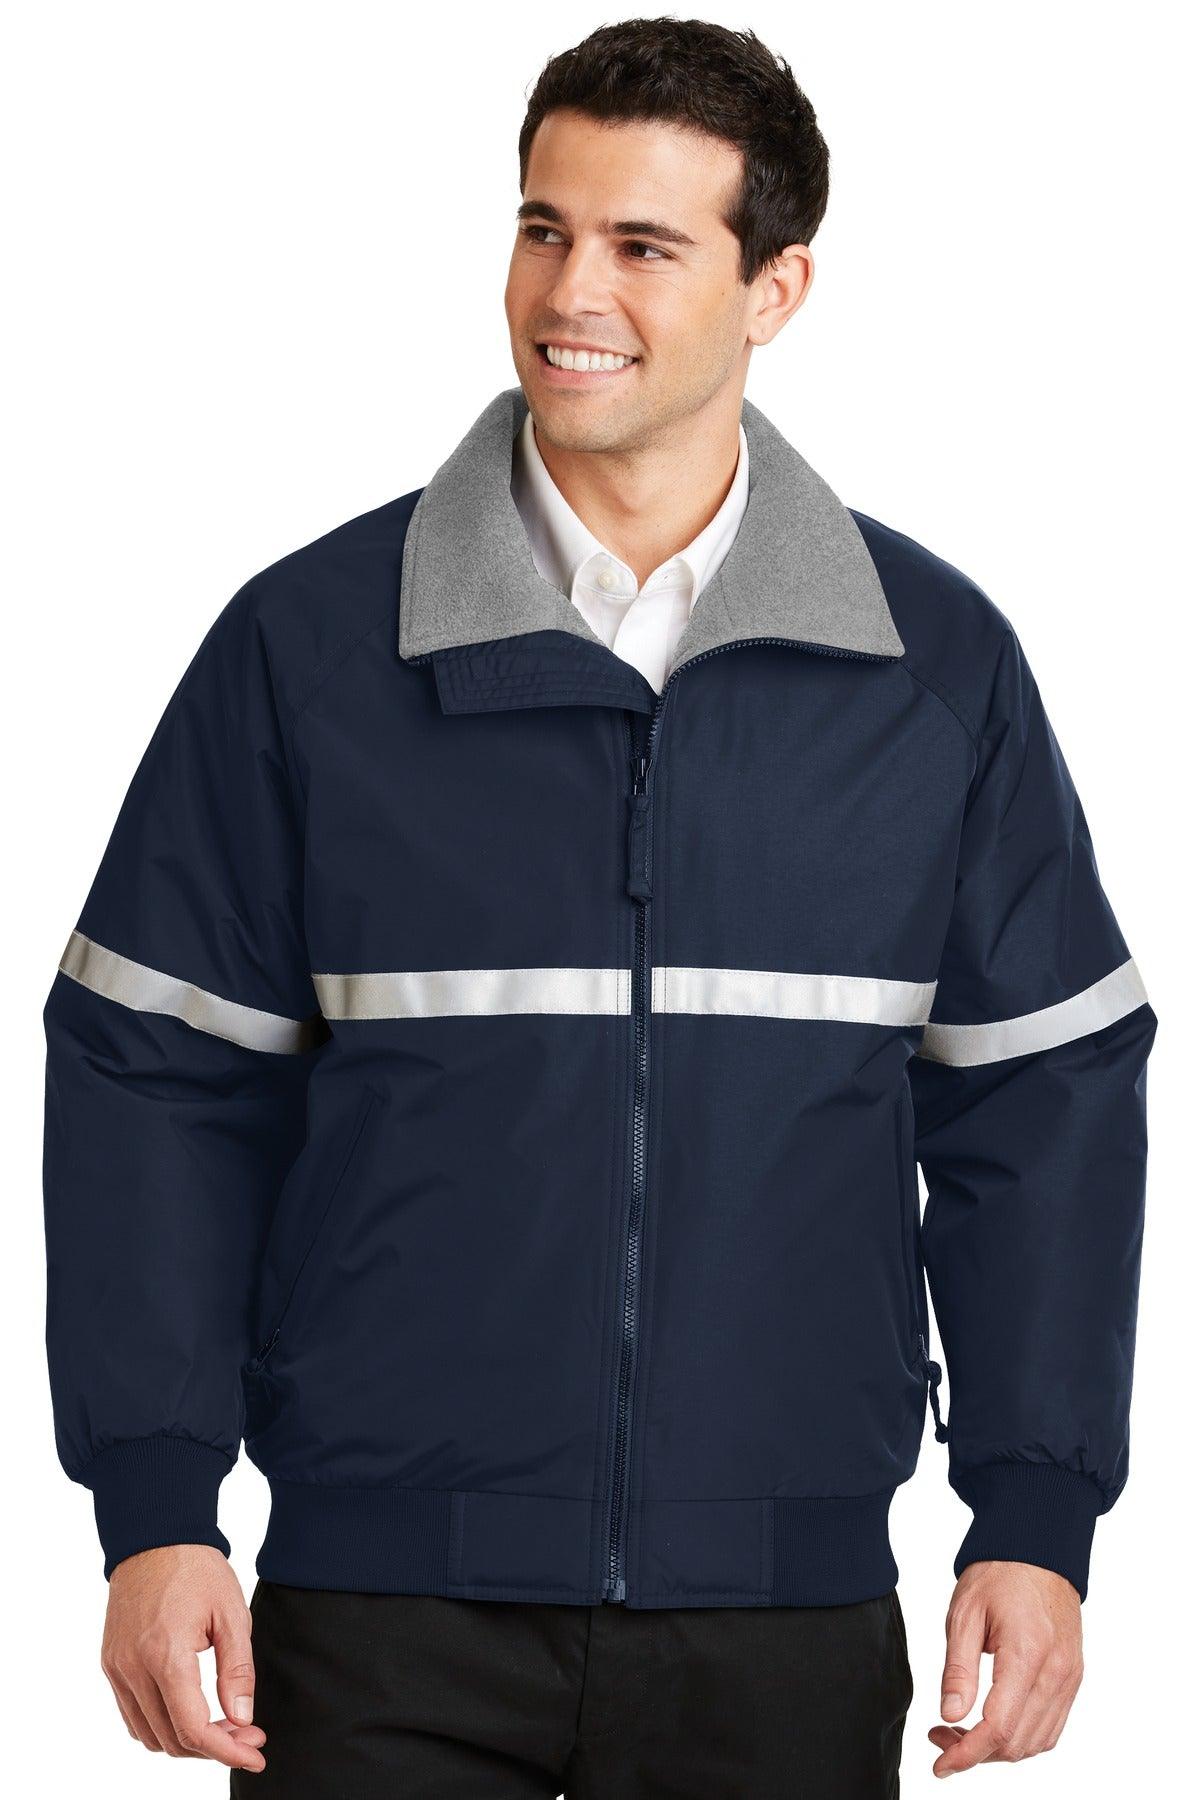 Port Authority Challenger Jacket with Reflective Taping. J754R - Dresses Max